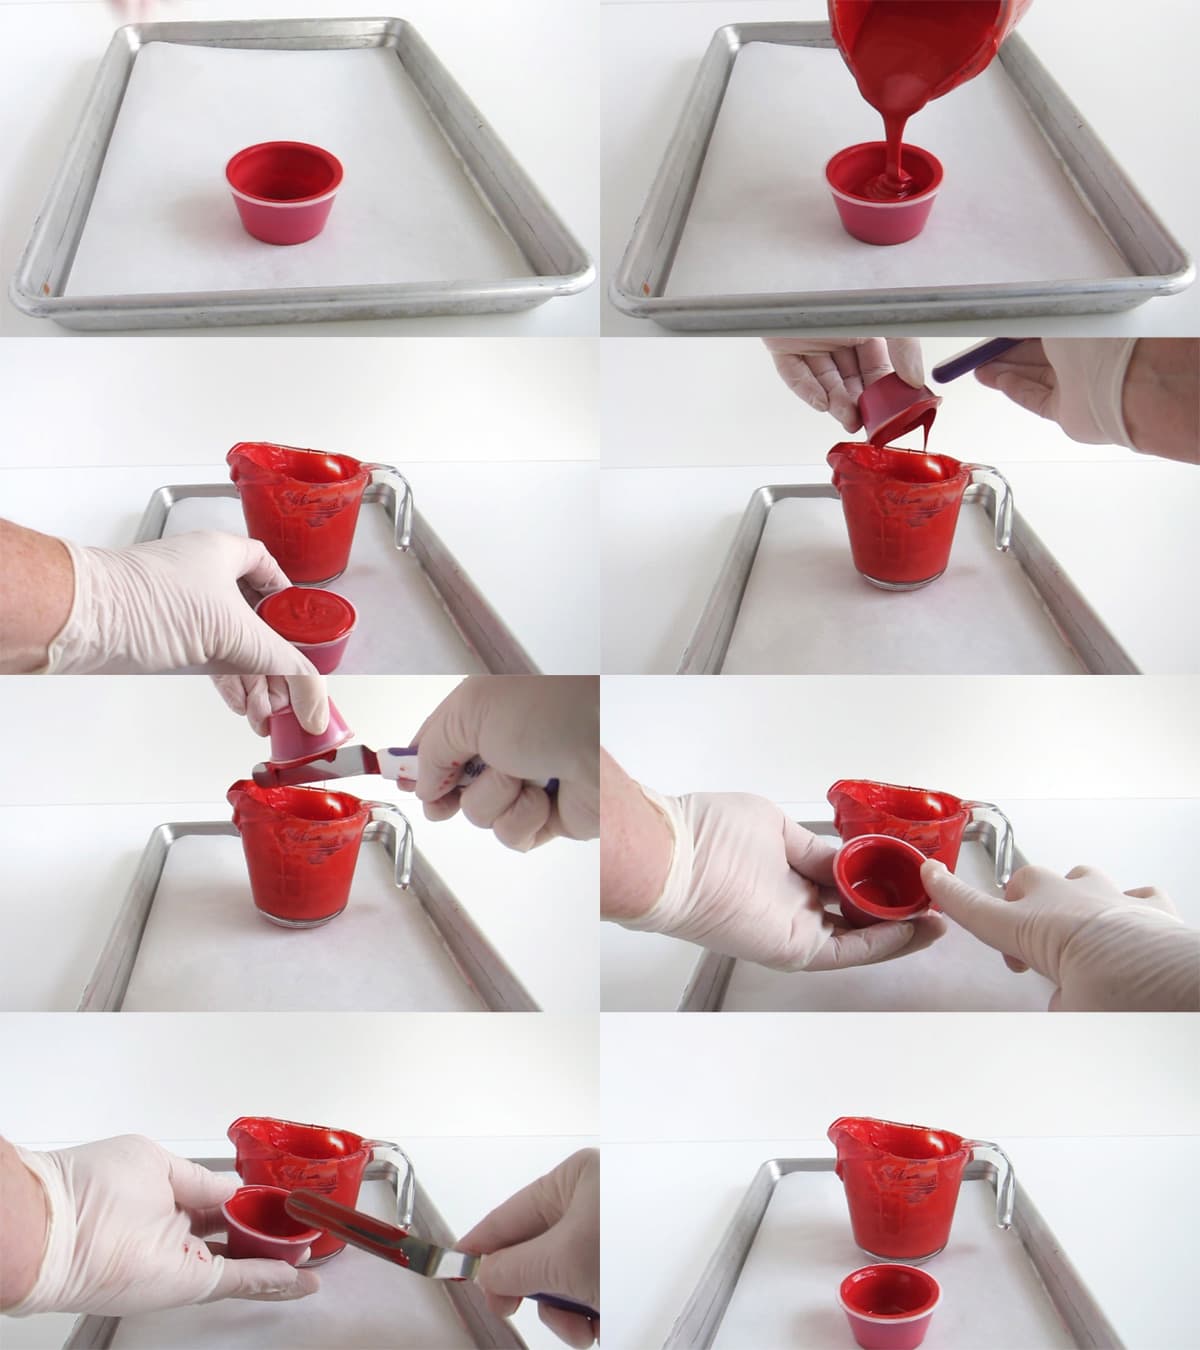 Create a second chocolate layer by pouring more red candy melts into the candy cup, dump out the excess. then freeze until hardened.